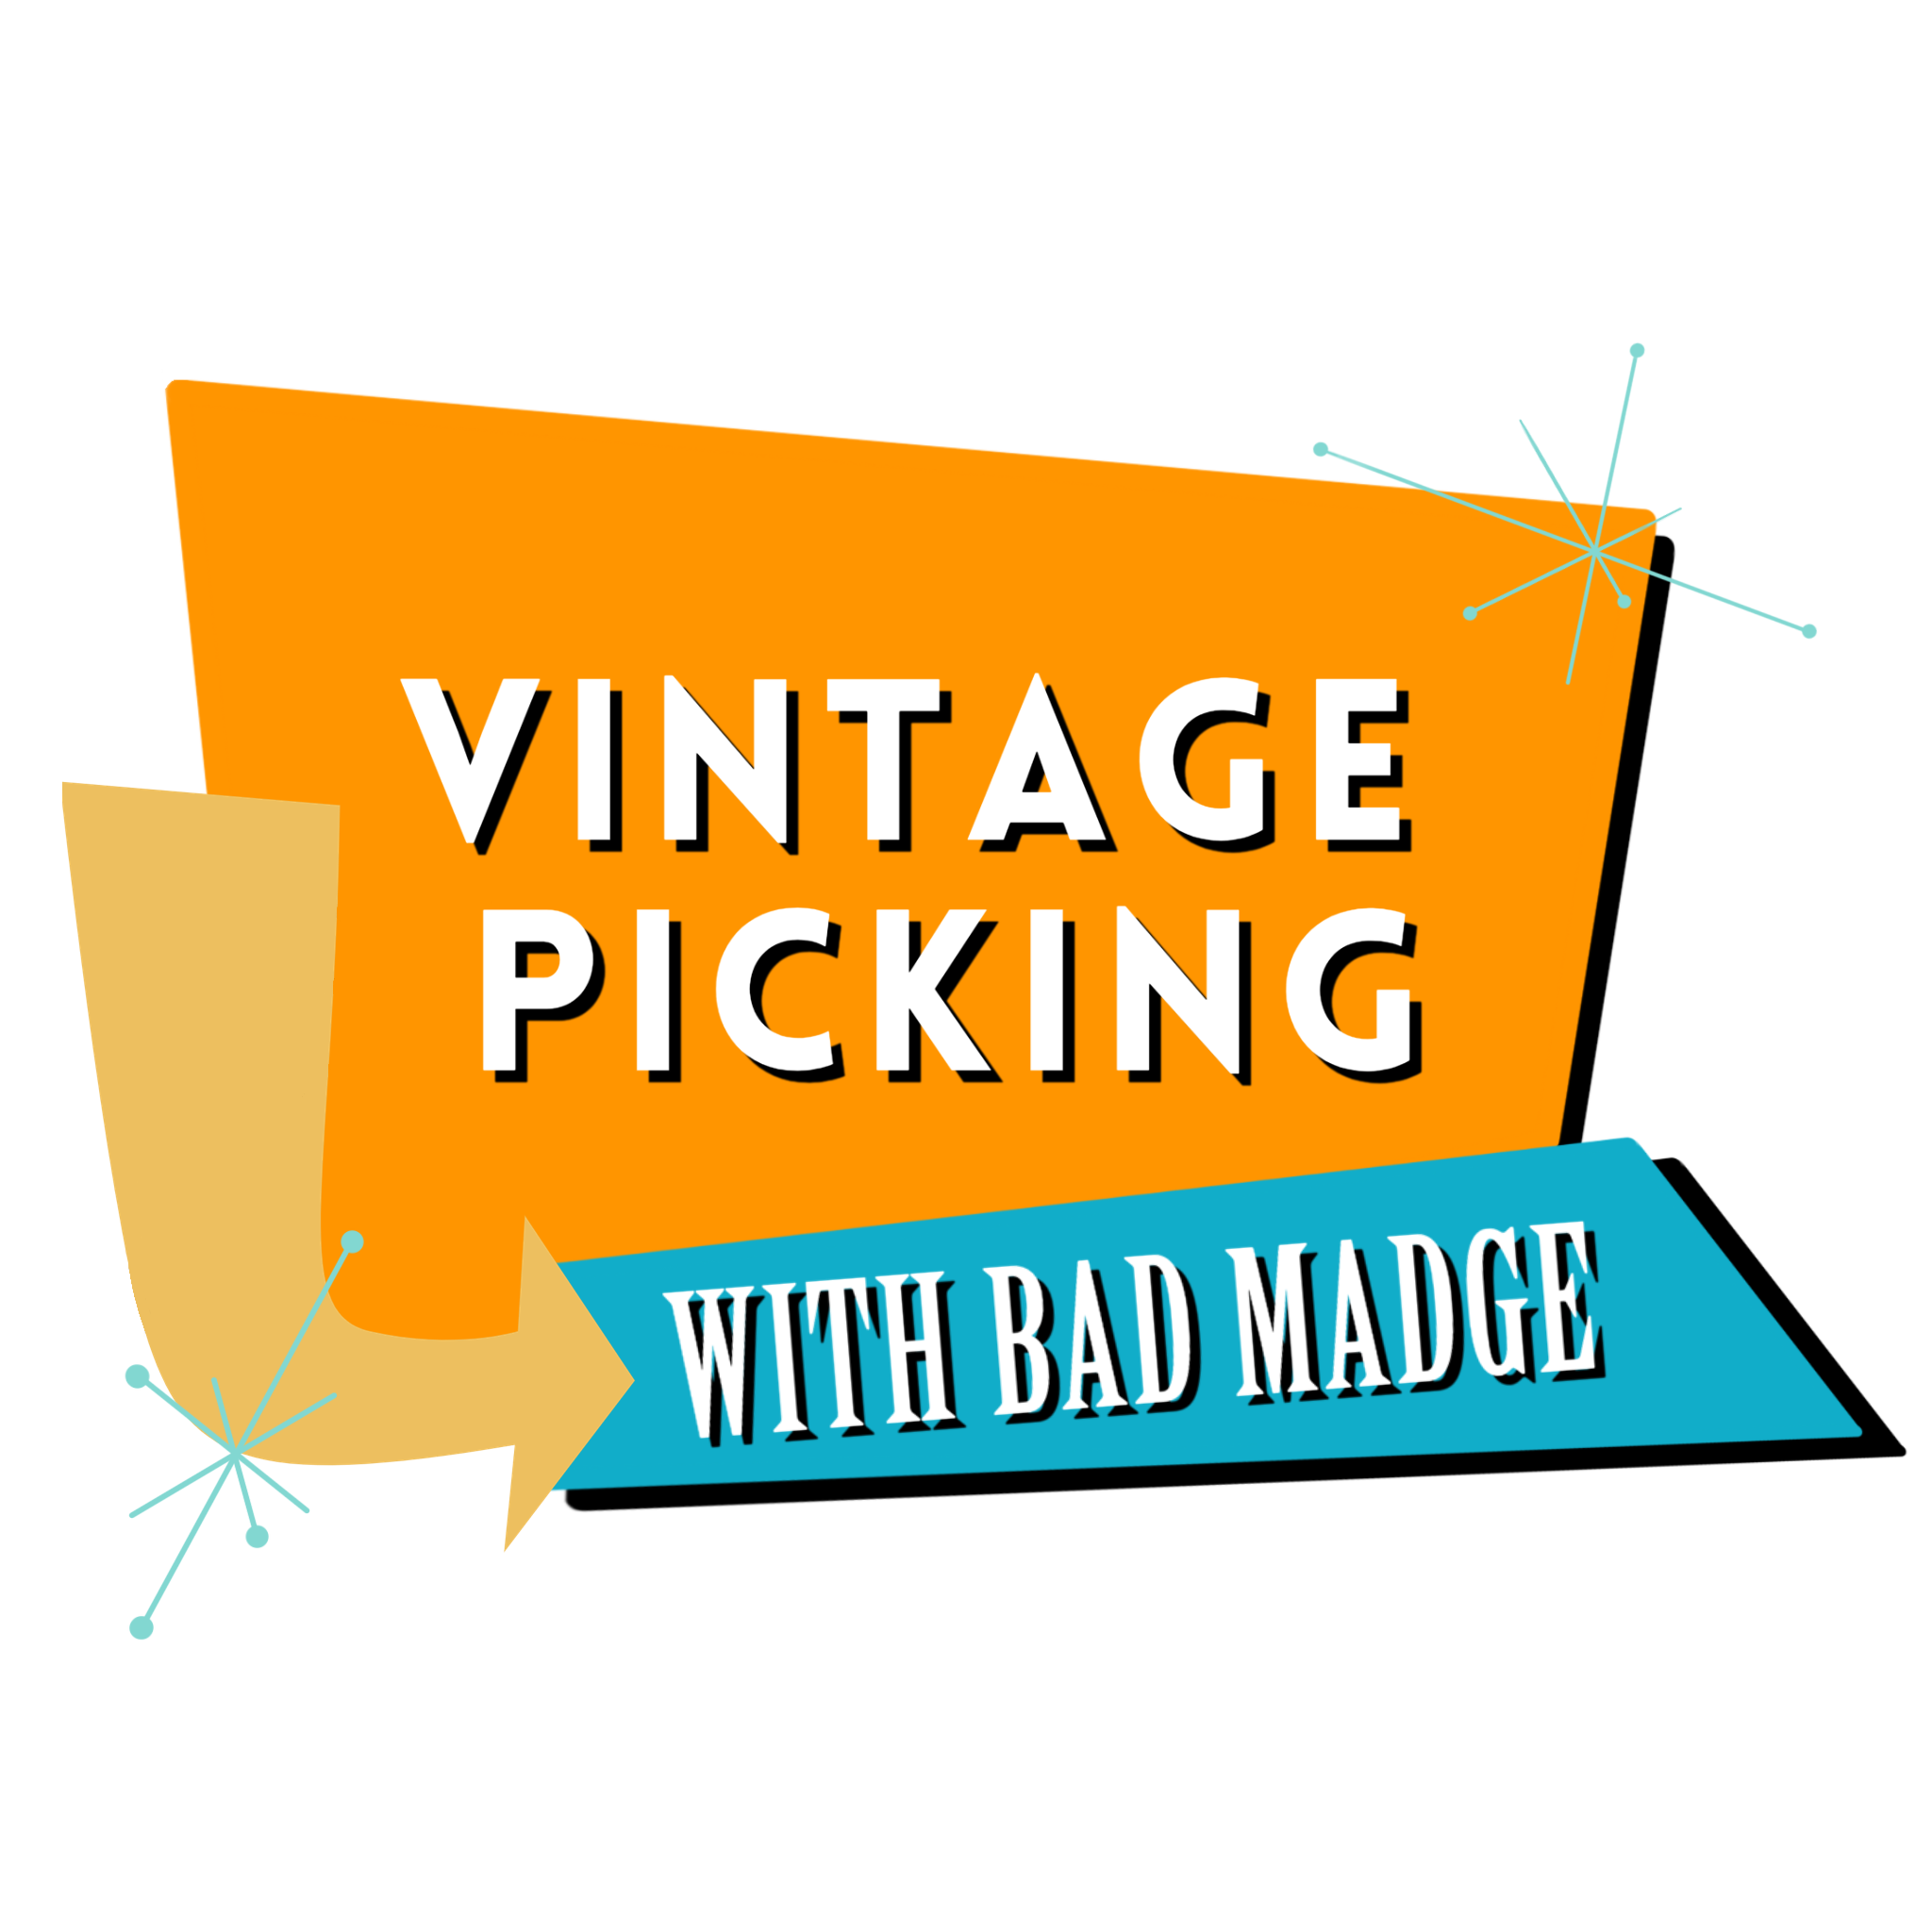 Vintage Picking with Bad Madge